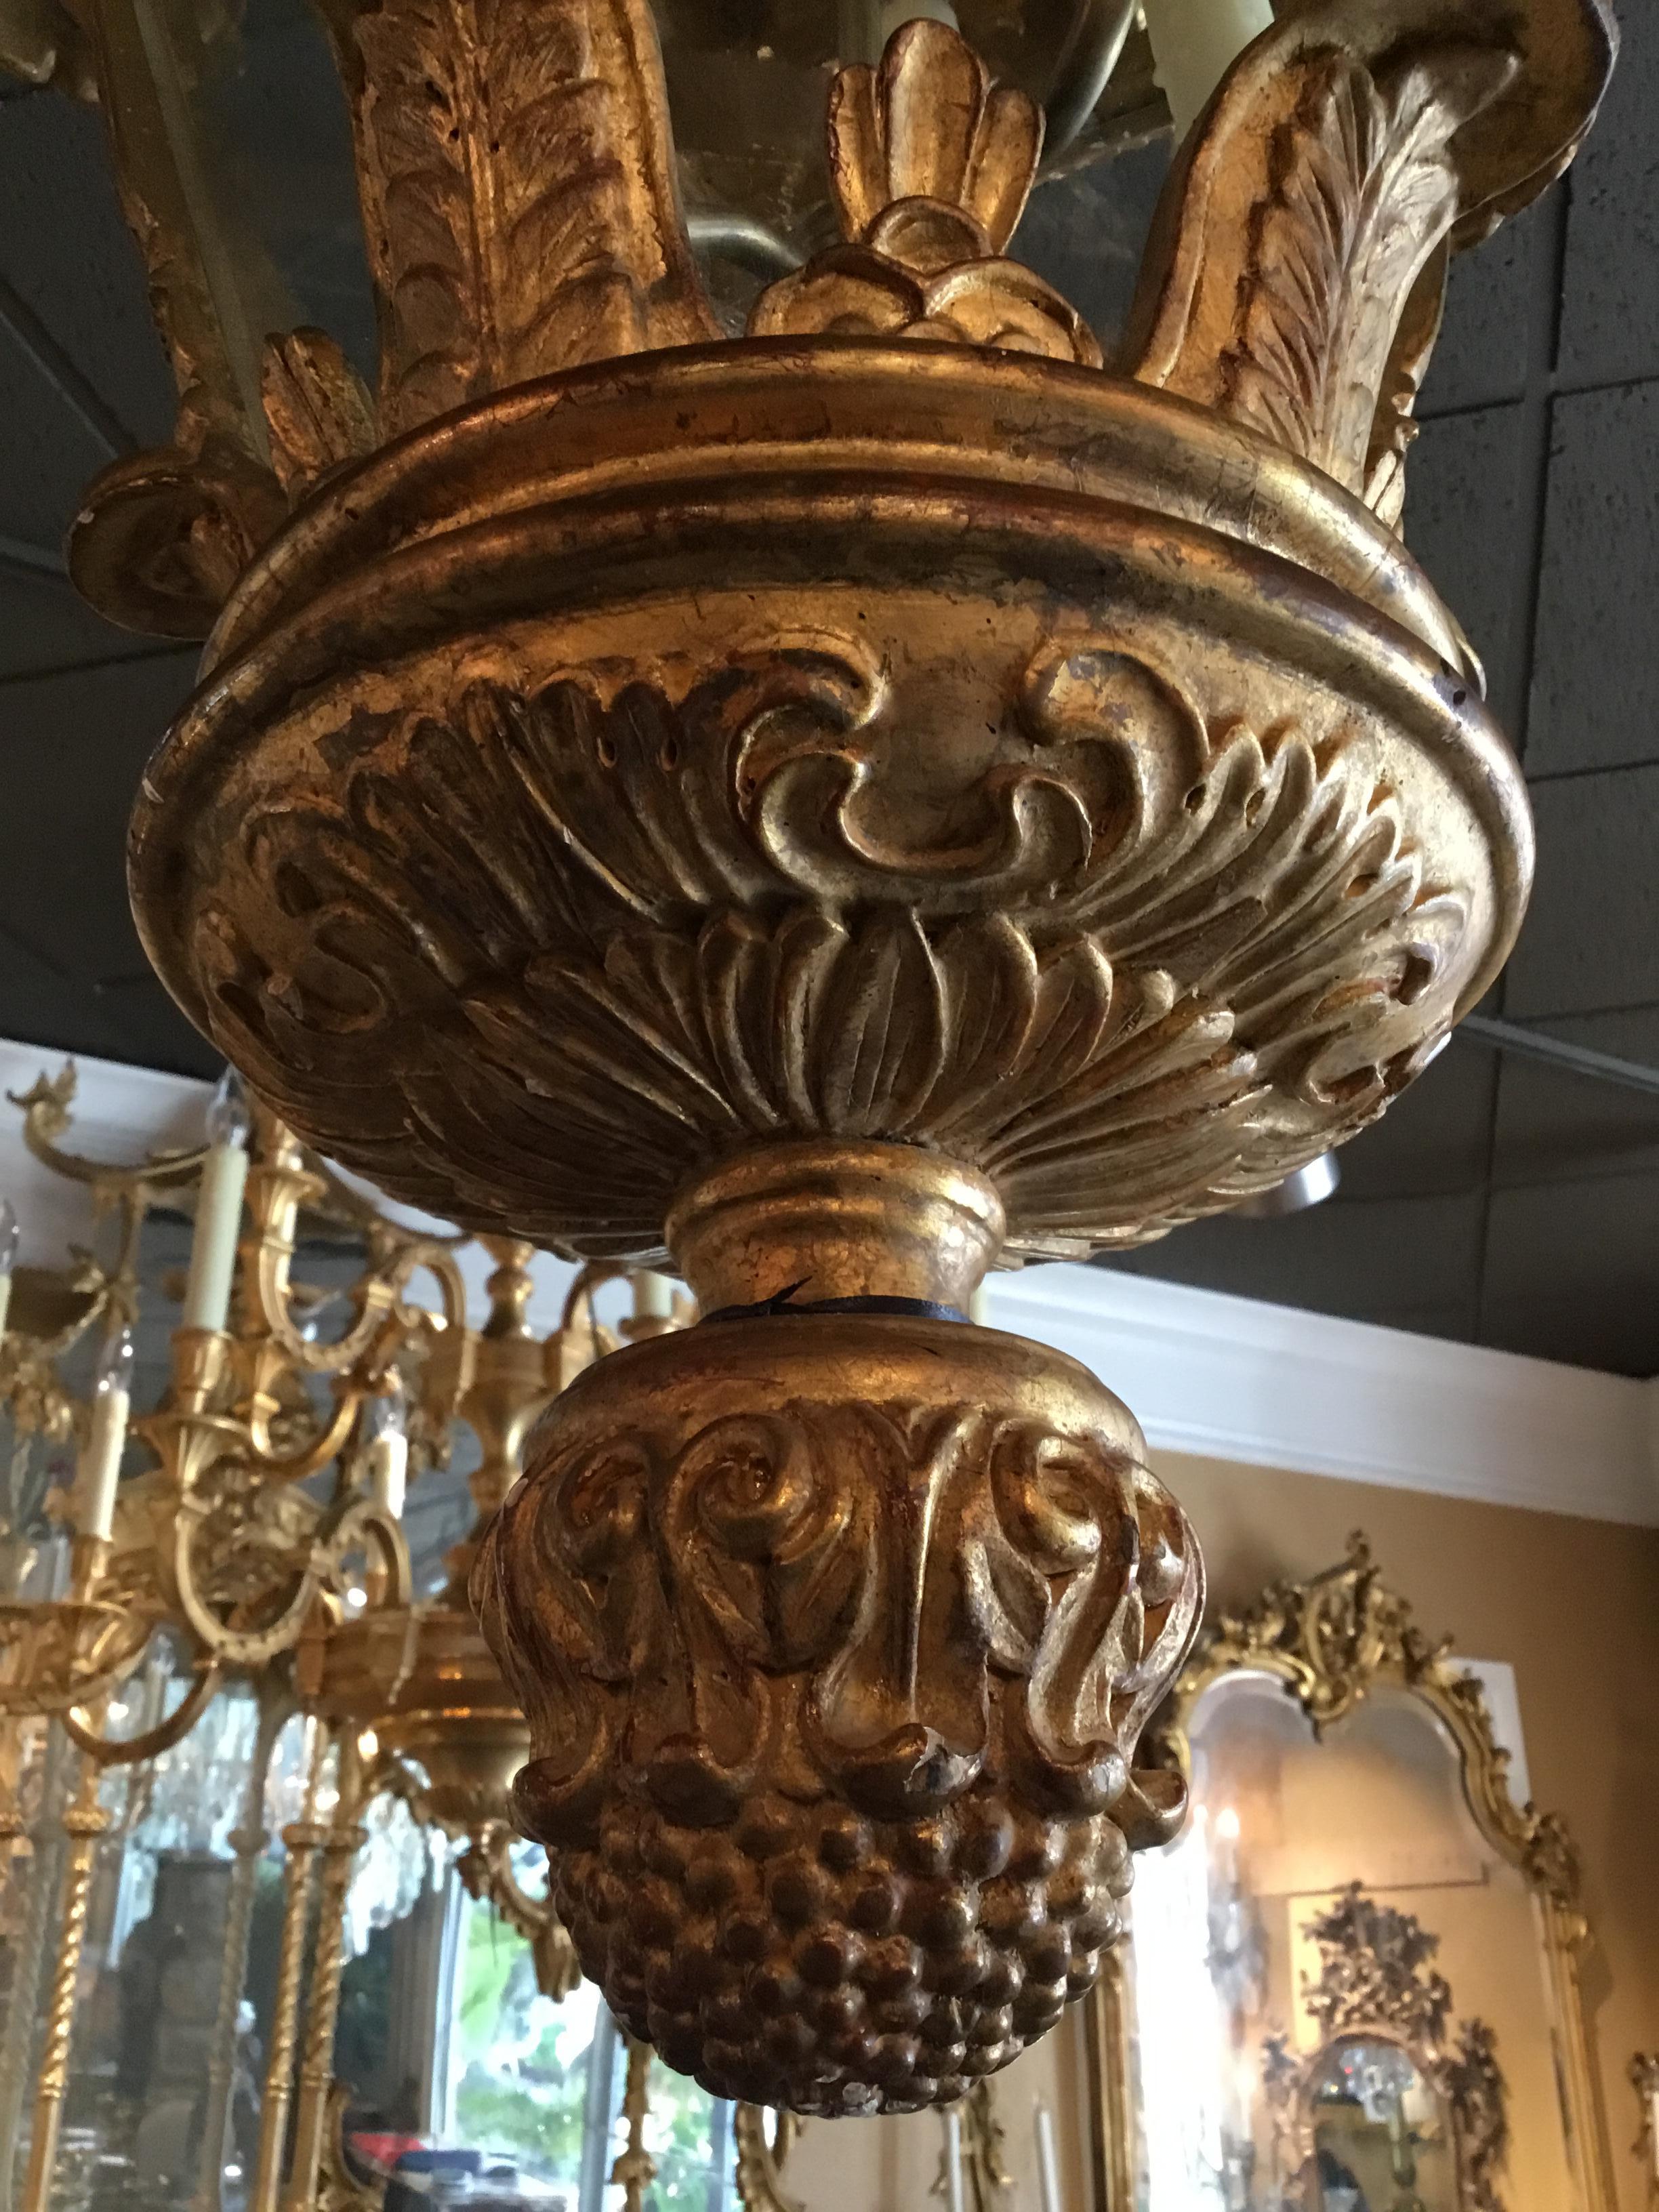 Handsome and impressive gilt carved wood lantern chandelier
Having 5 lights with wax sleeves.